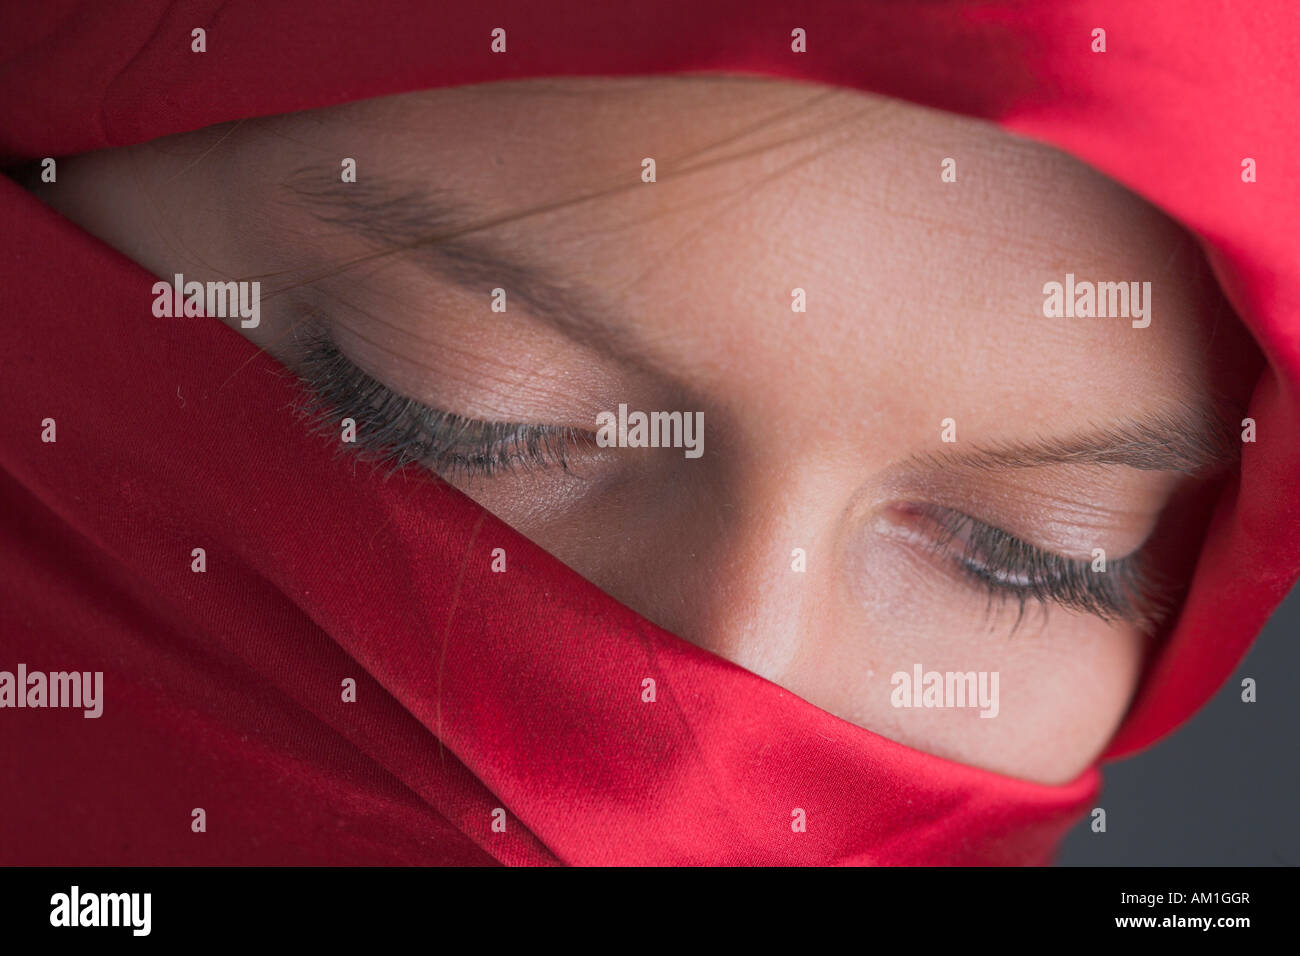 Veiled, young woman looking down Stock Photo